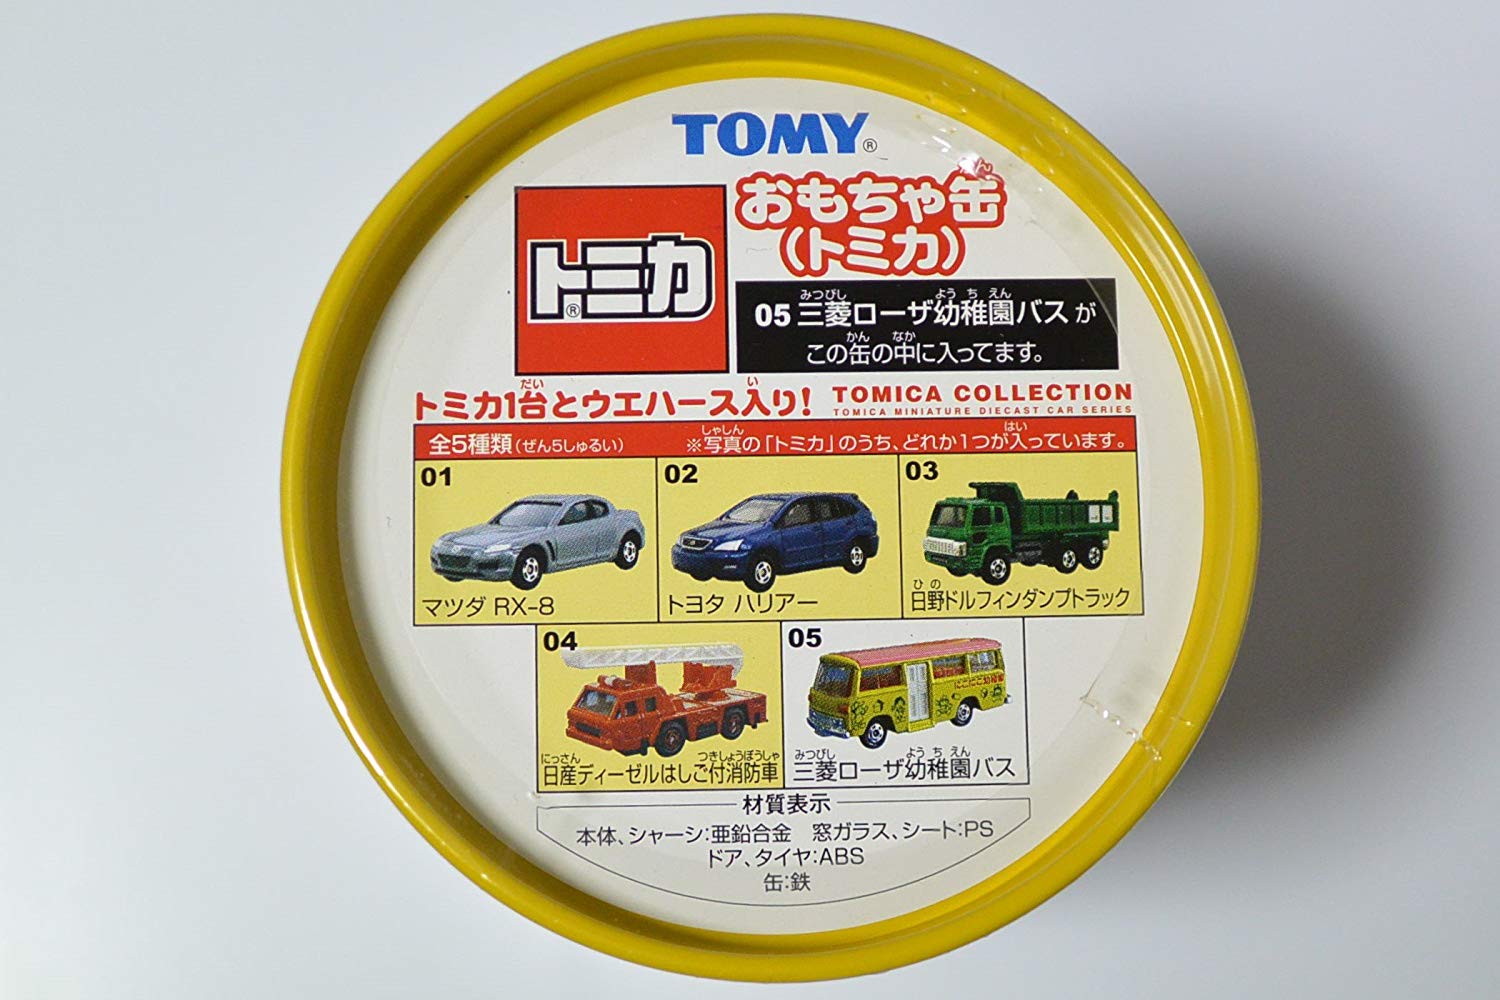 Tomica Can Series 5 | Tomica Wiki | Fandom